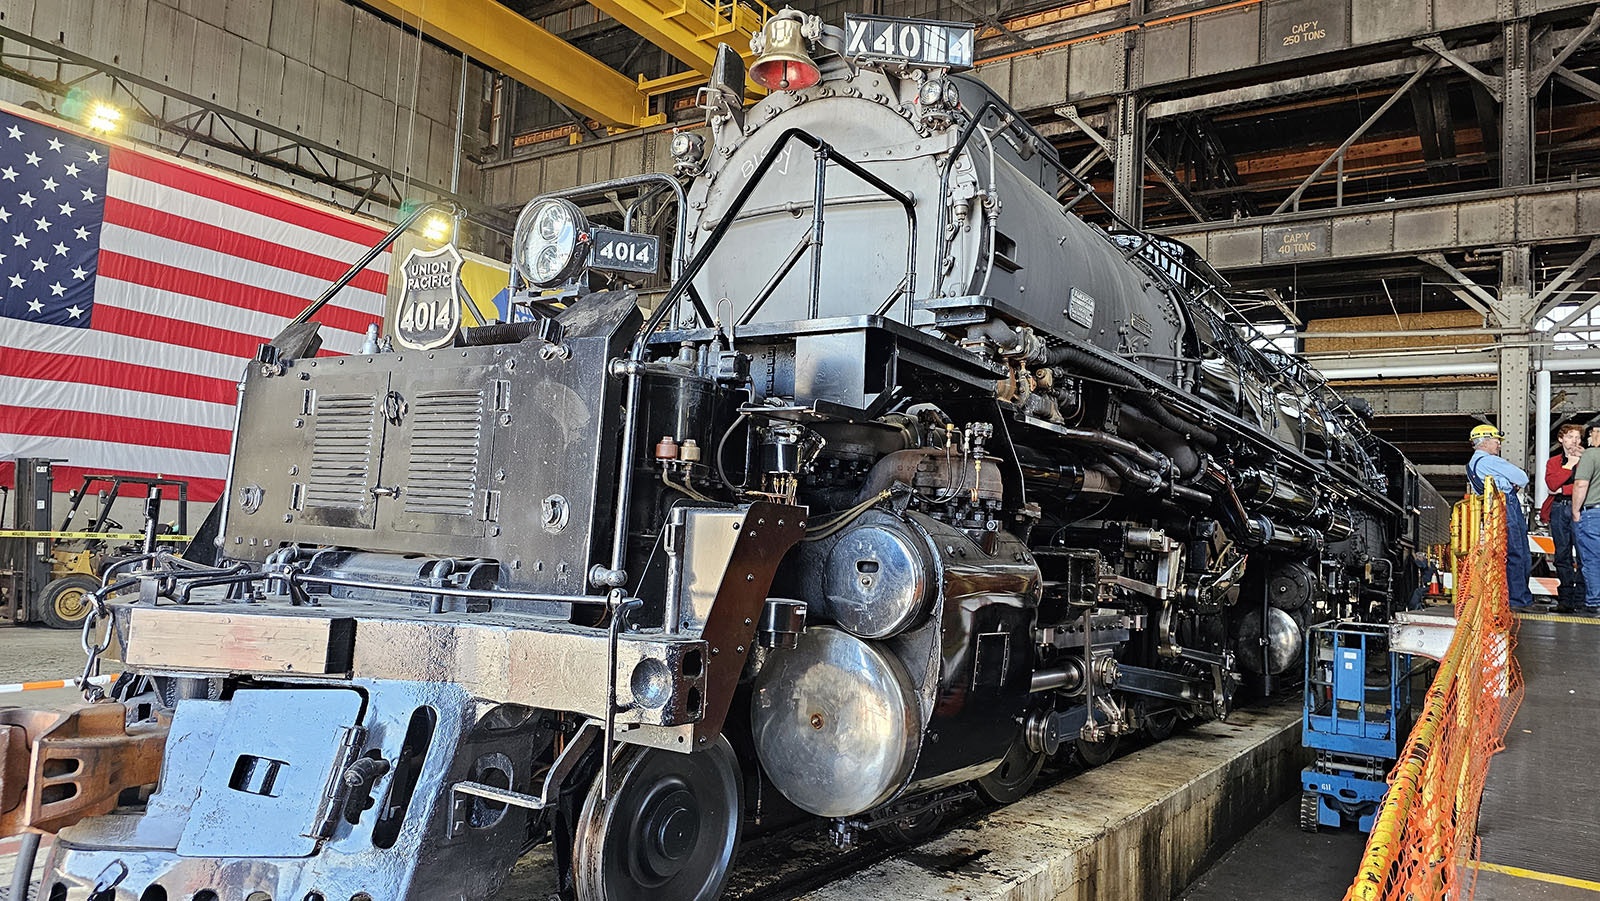 Big Boy at the Union Pacific Steam Shop in Cheyenne.